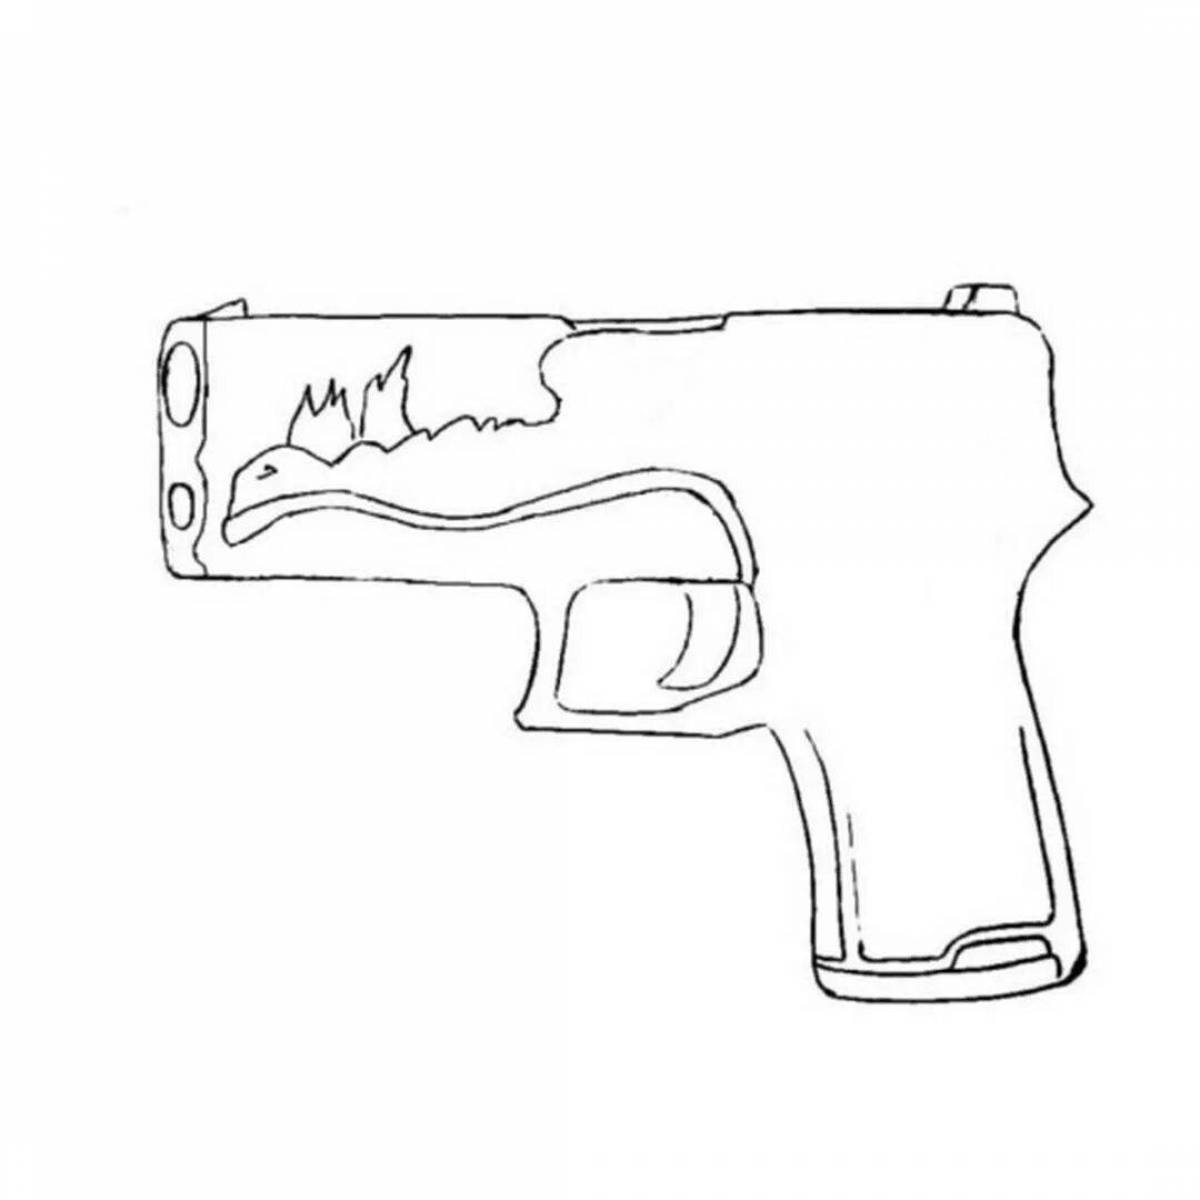 Exquisite coloring of pistols from standoff 2